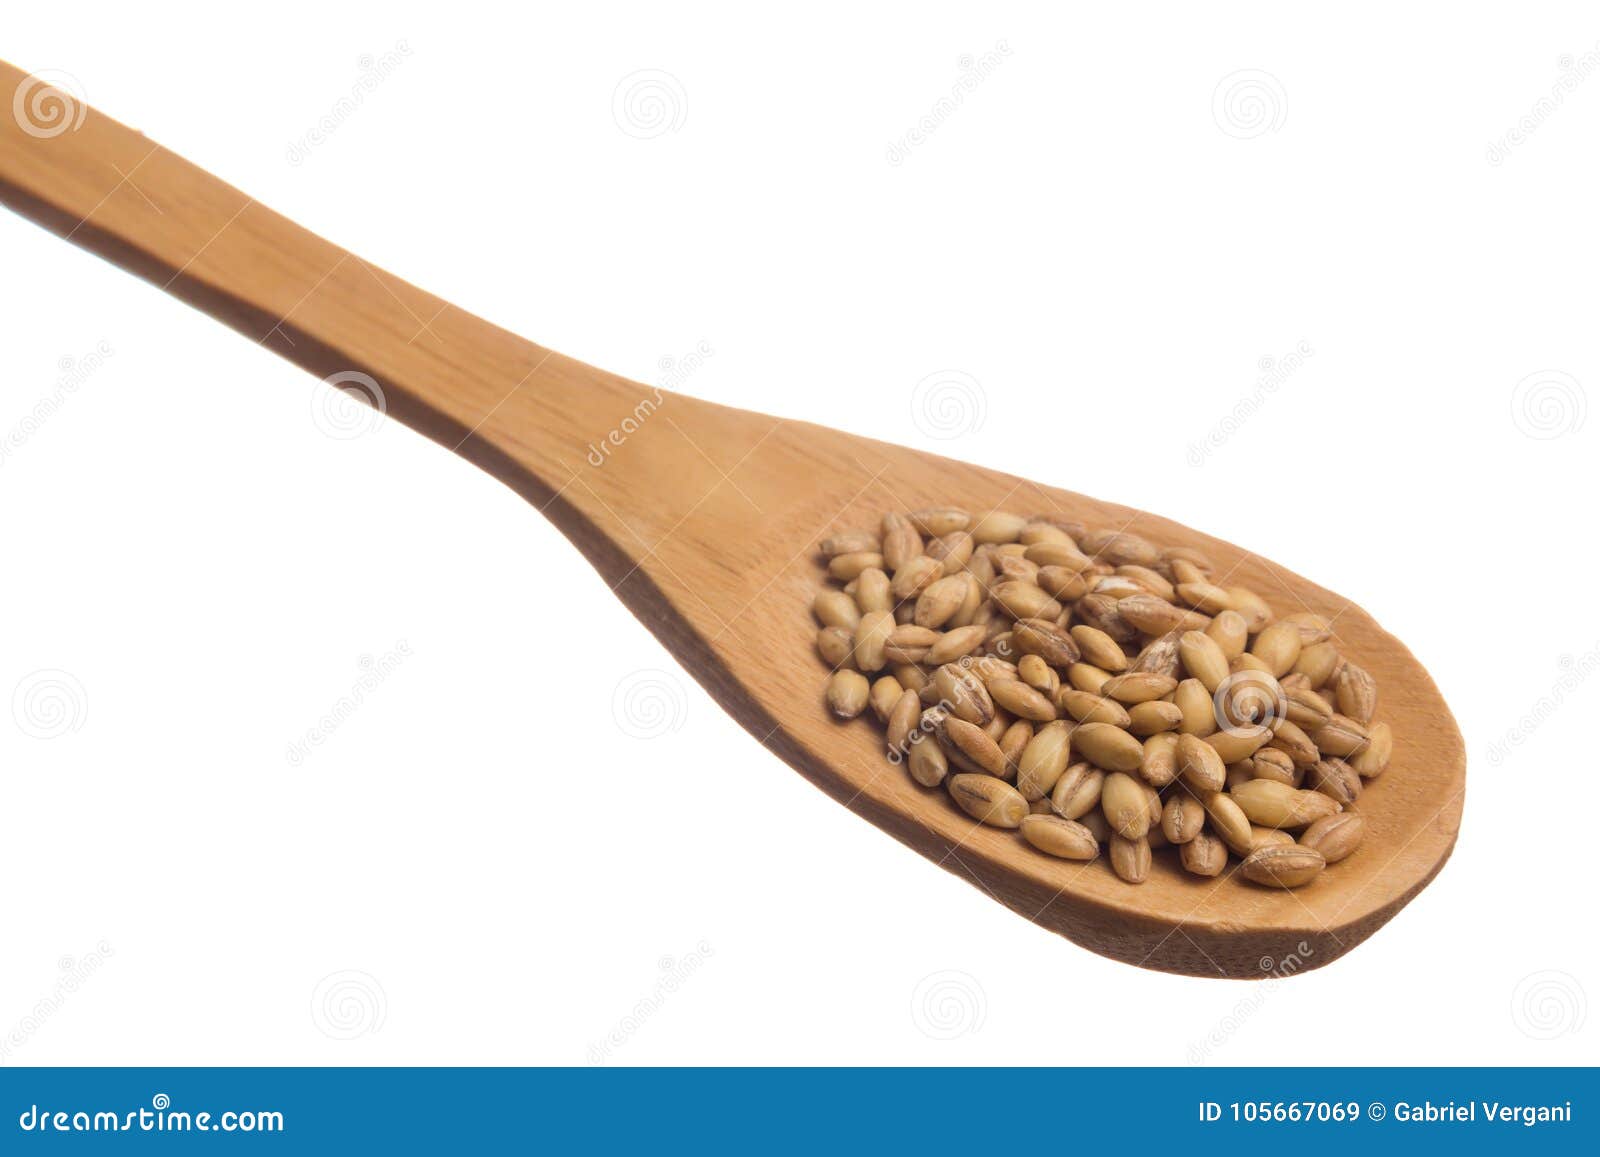 barley. grains over wooden spoon,  white background.